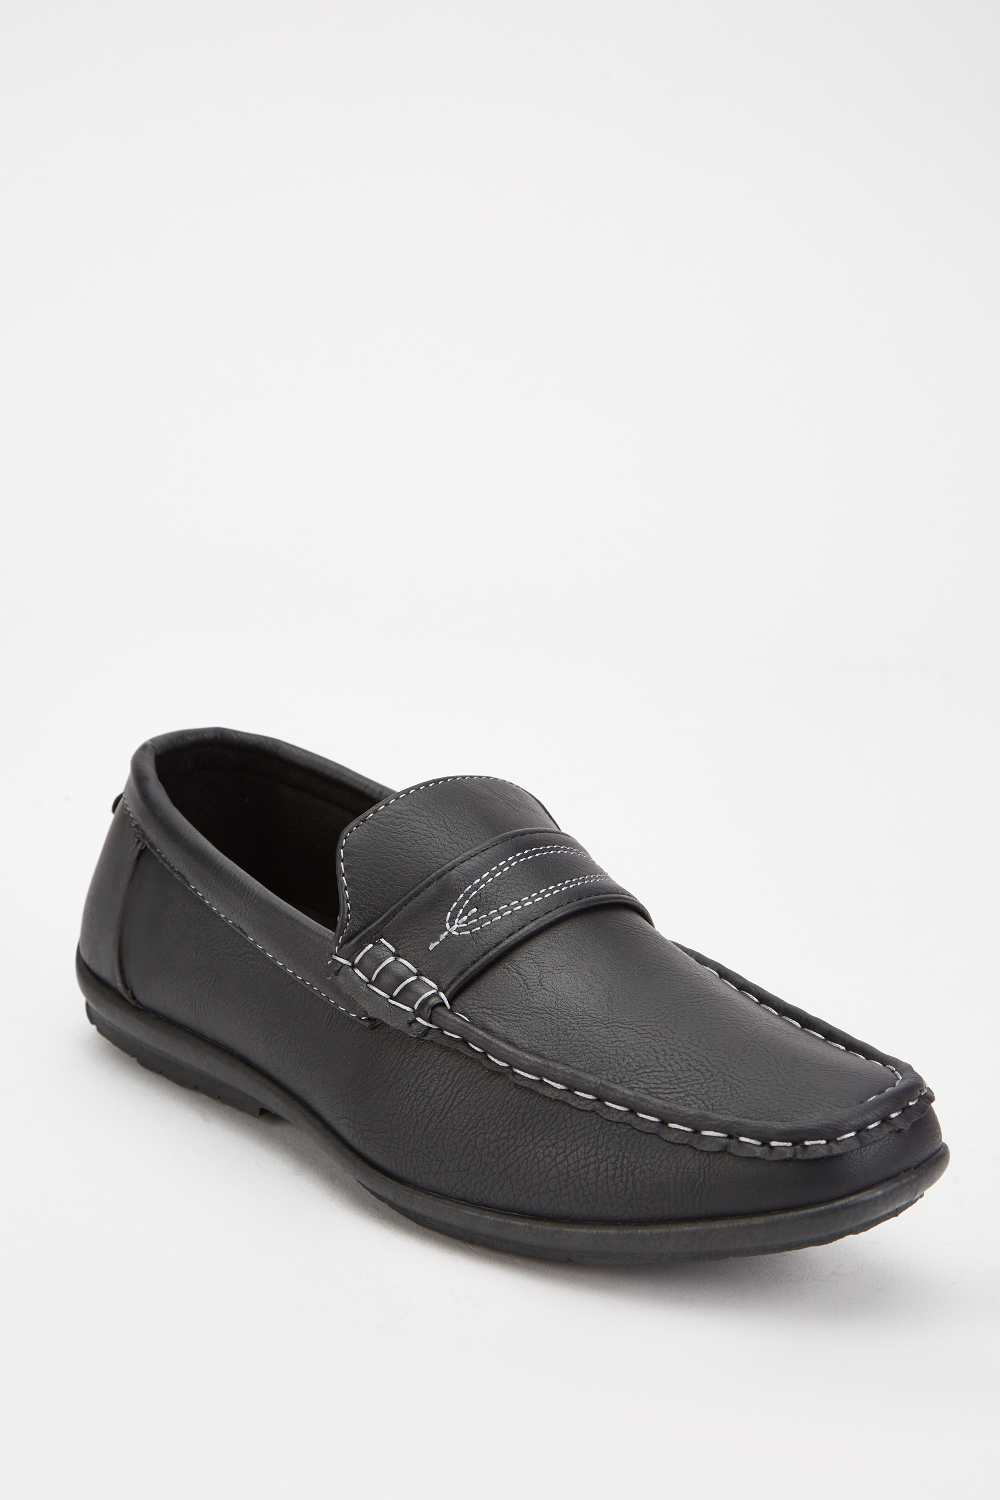 Slip On Mens Loafers - Just $7